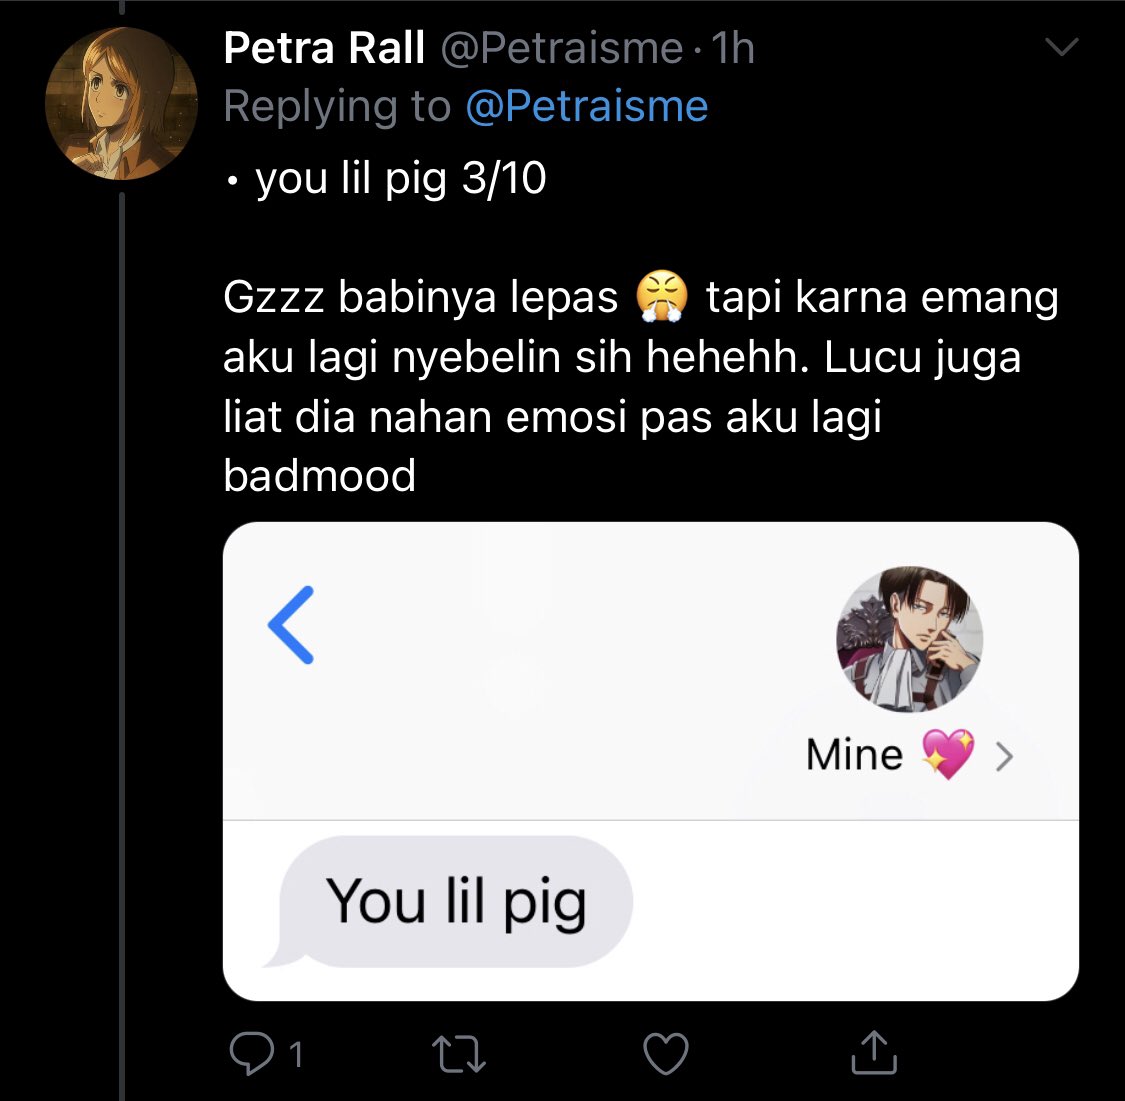 You lil pig